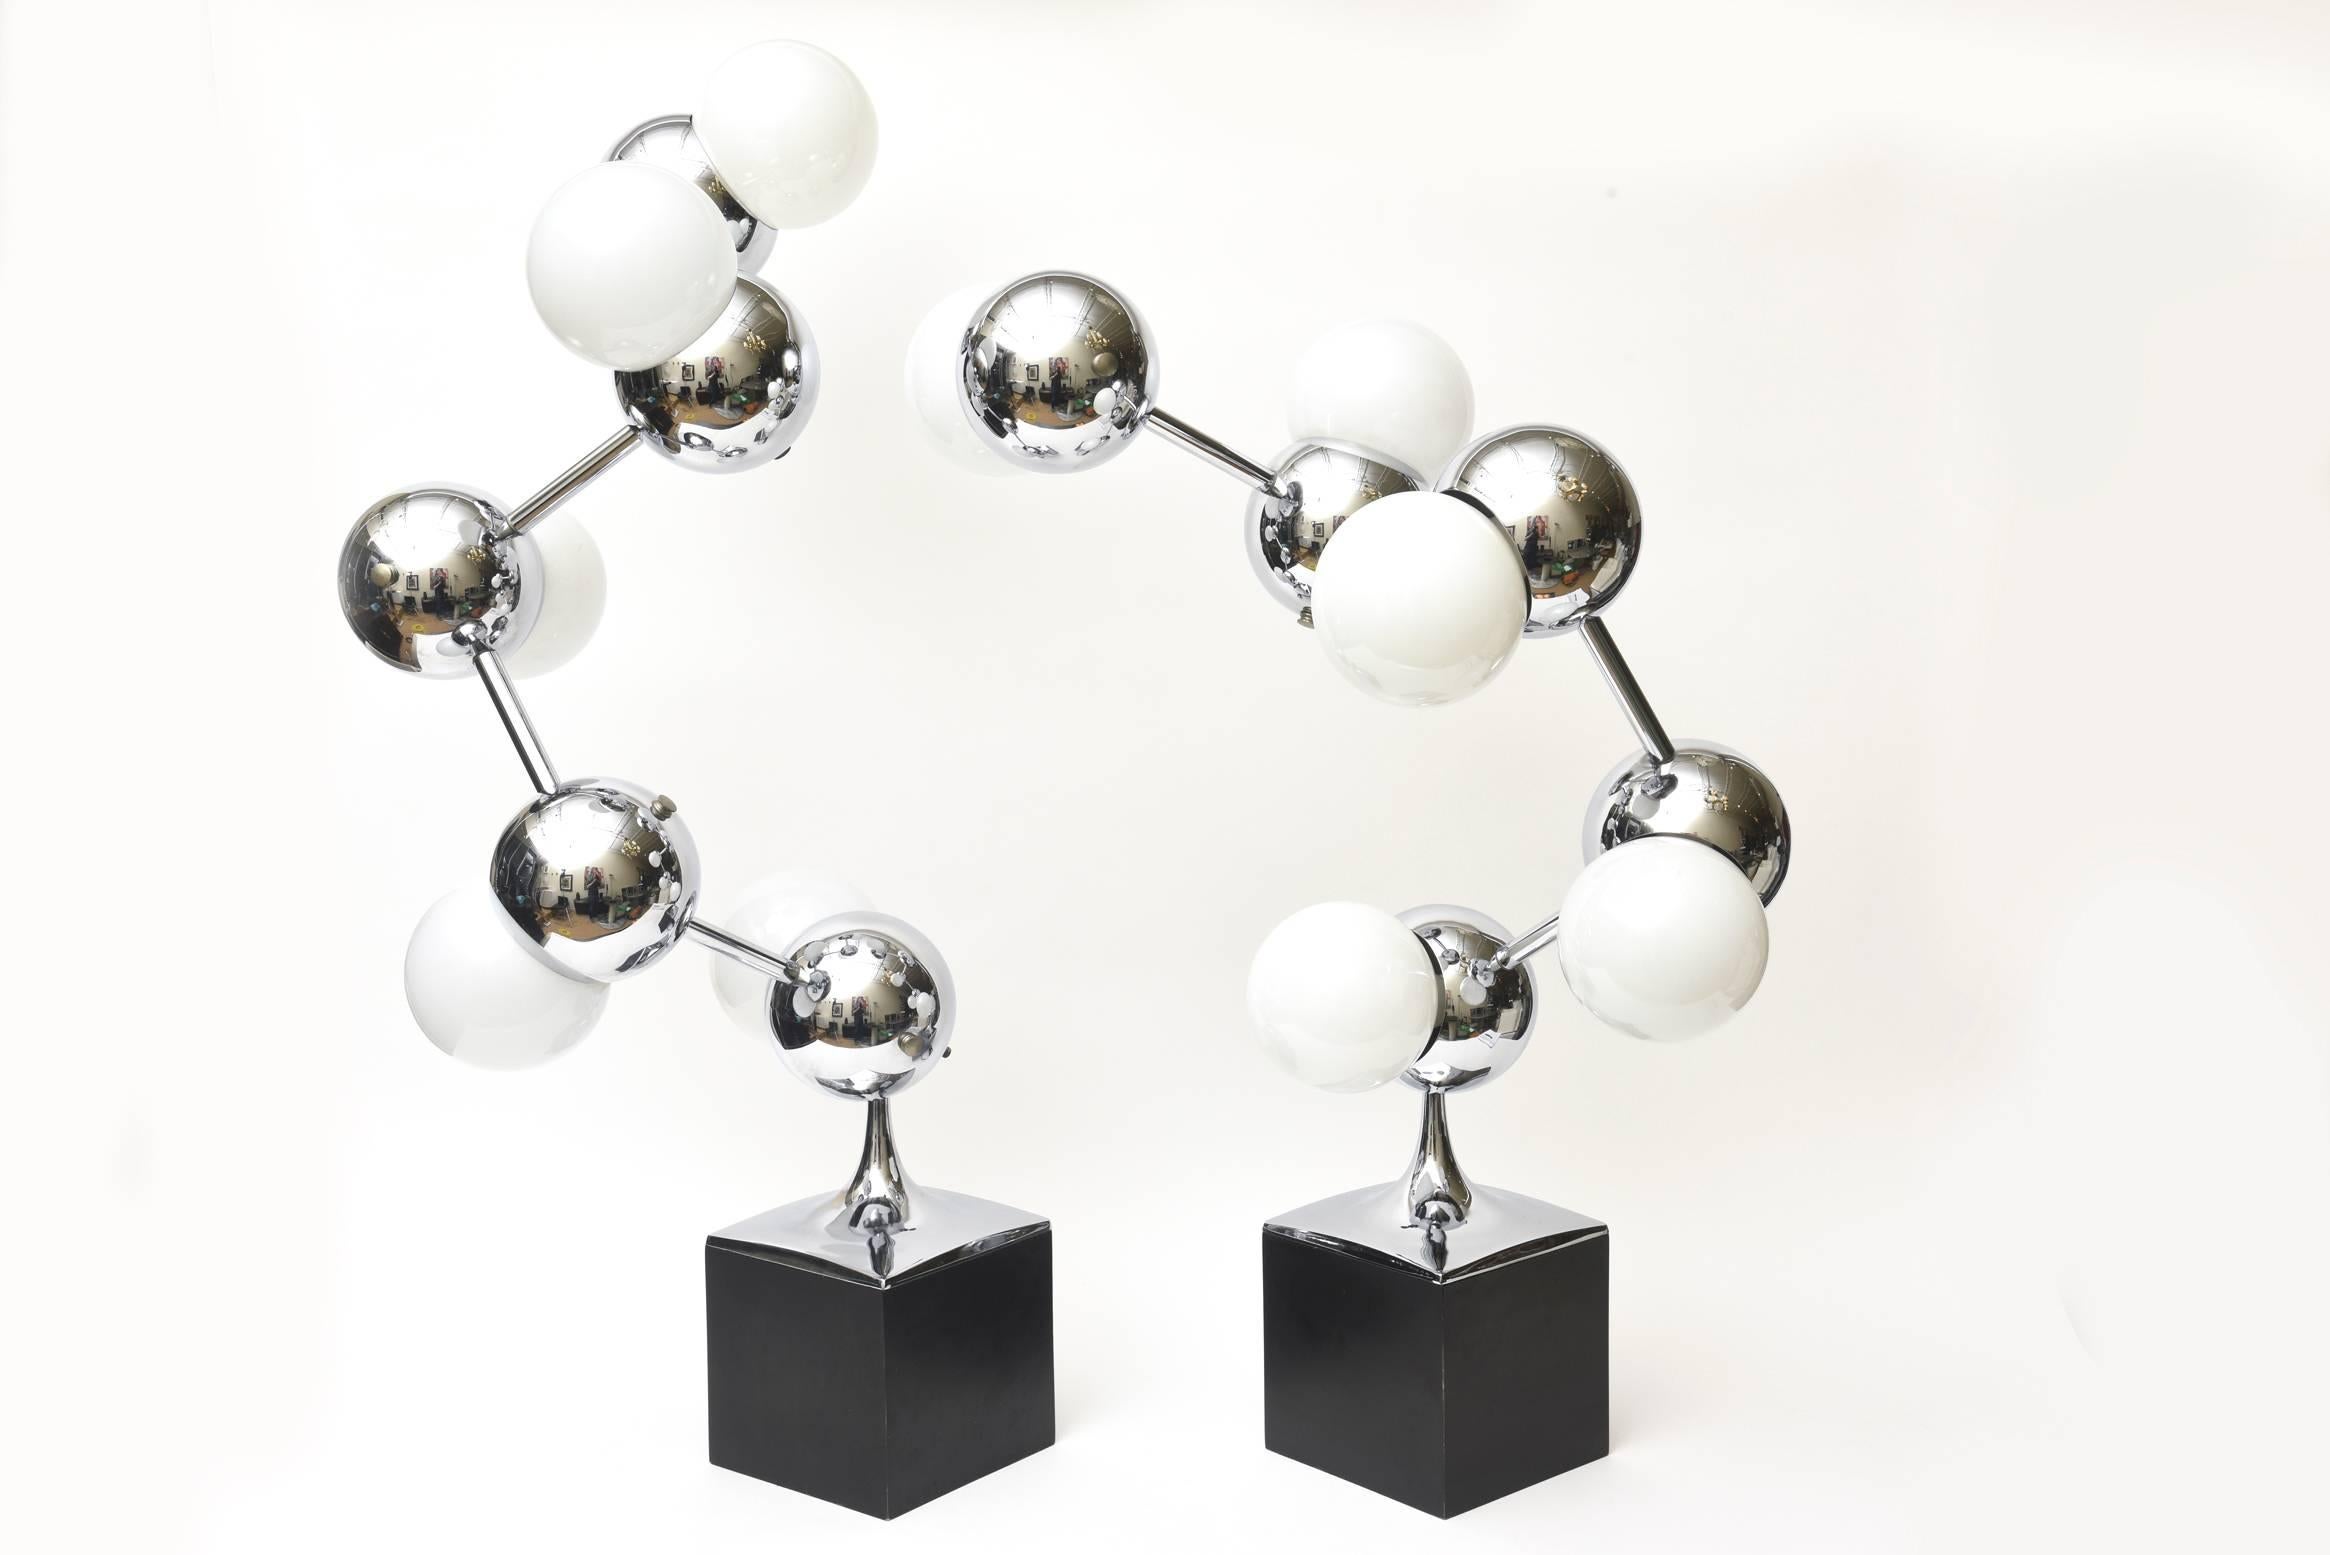 These amazing pair of large rare Mid-Century Modern Robert Sonneman chrome and wood sculptural atomic/ molecular lamps are each five lights. These particular model of these lamps are more on the rare side and the largest size made of these. This